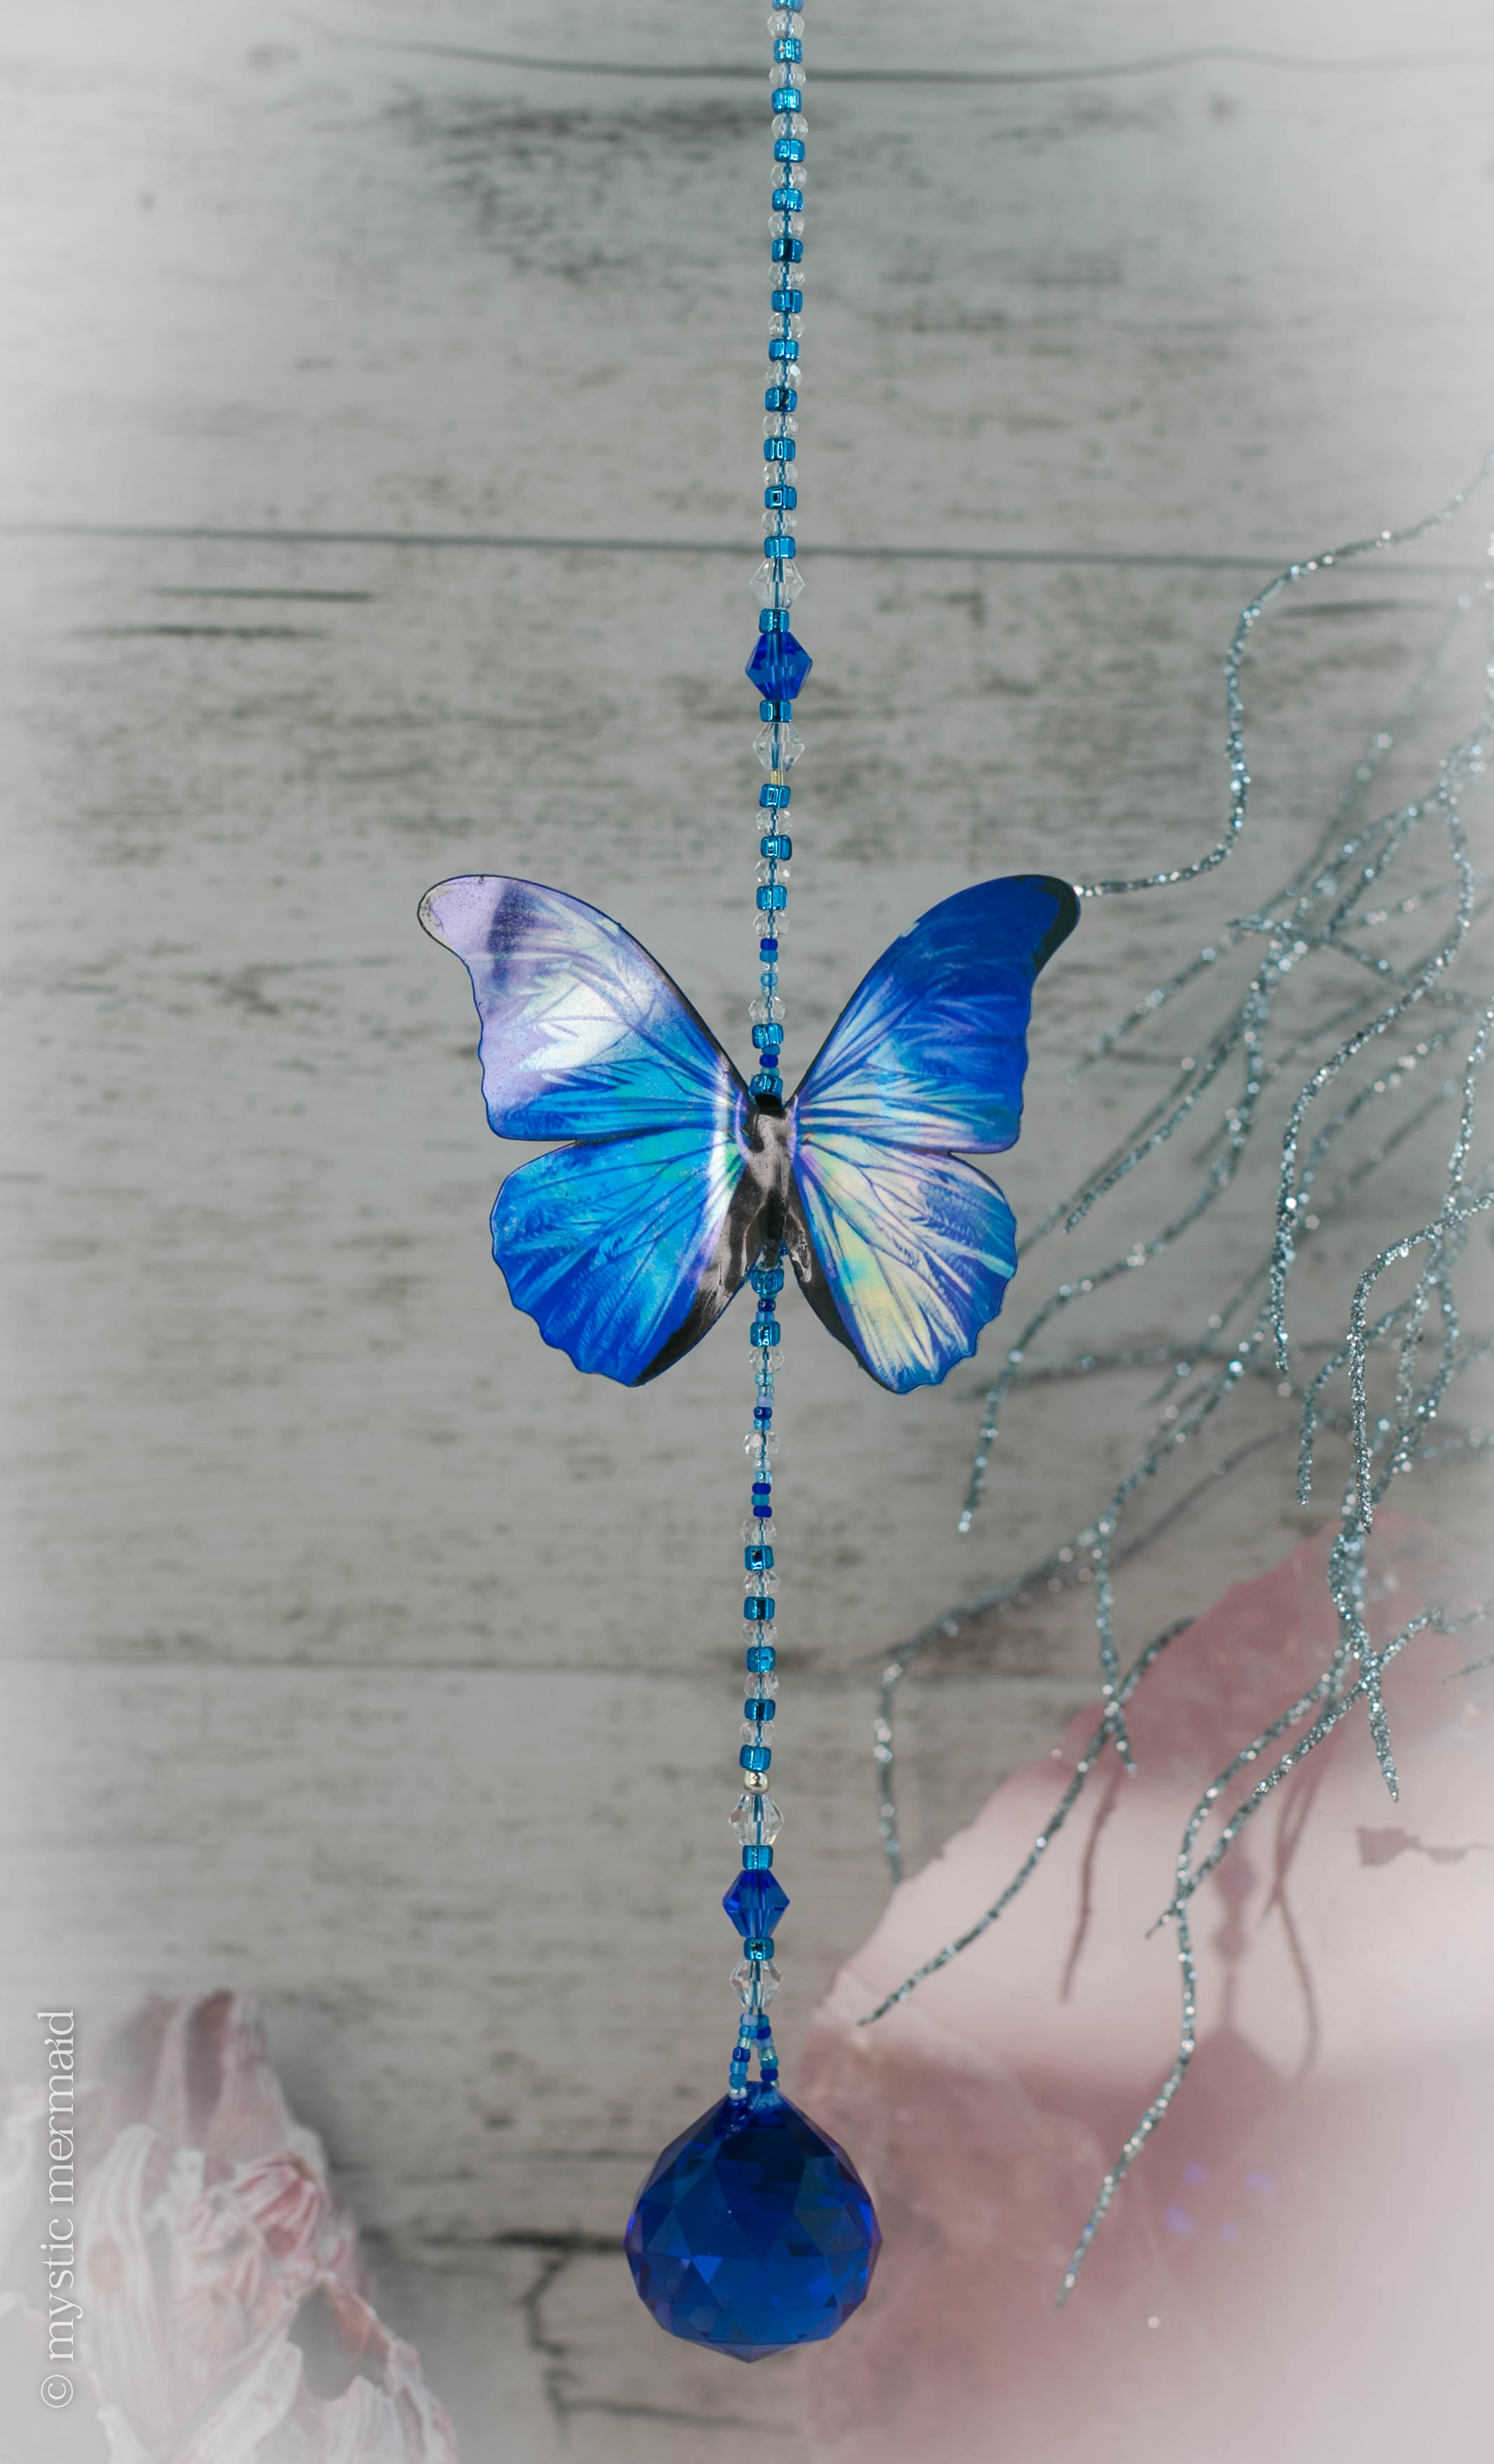 Radiant Happiness - Holographic Morpho Butterfly SunCatcher by Mystic Mermaid